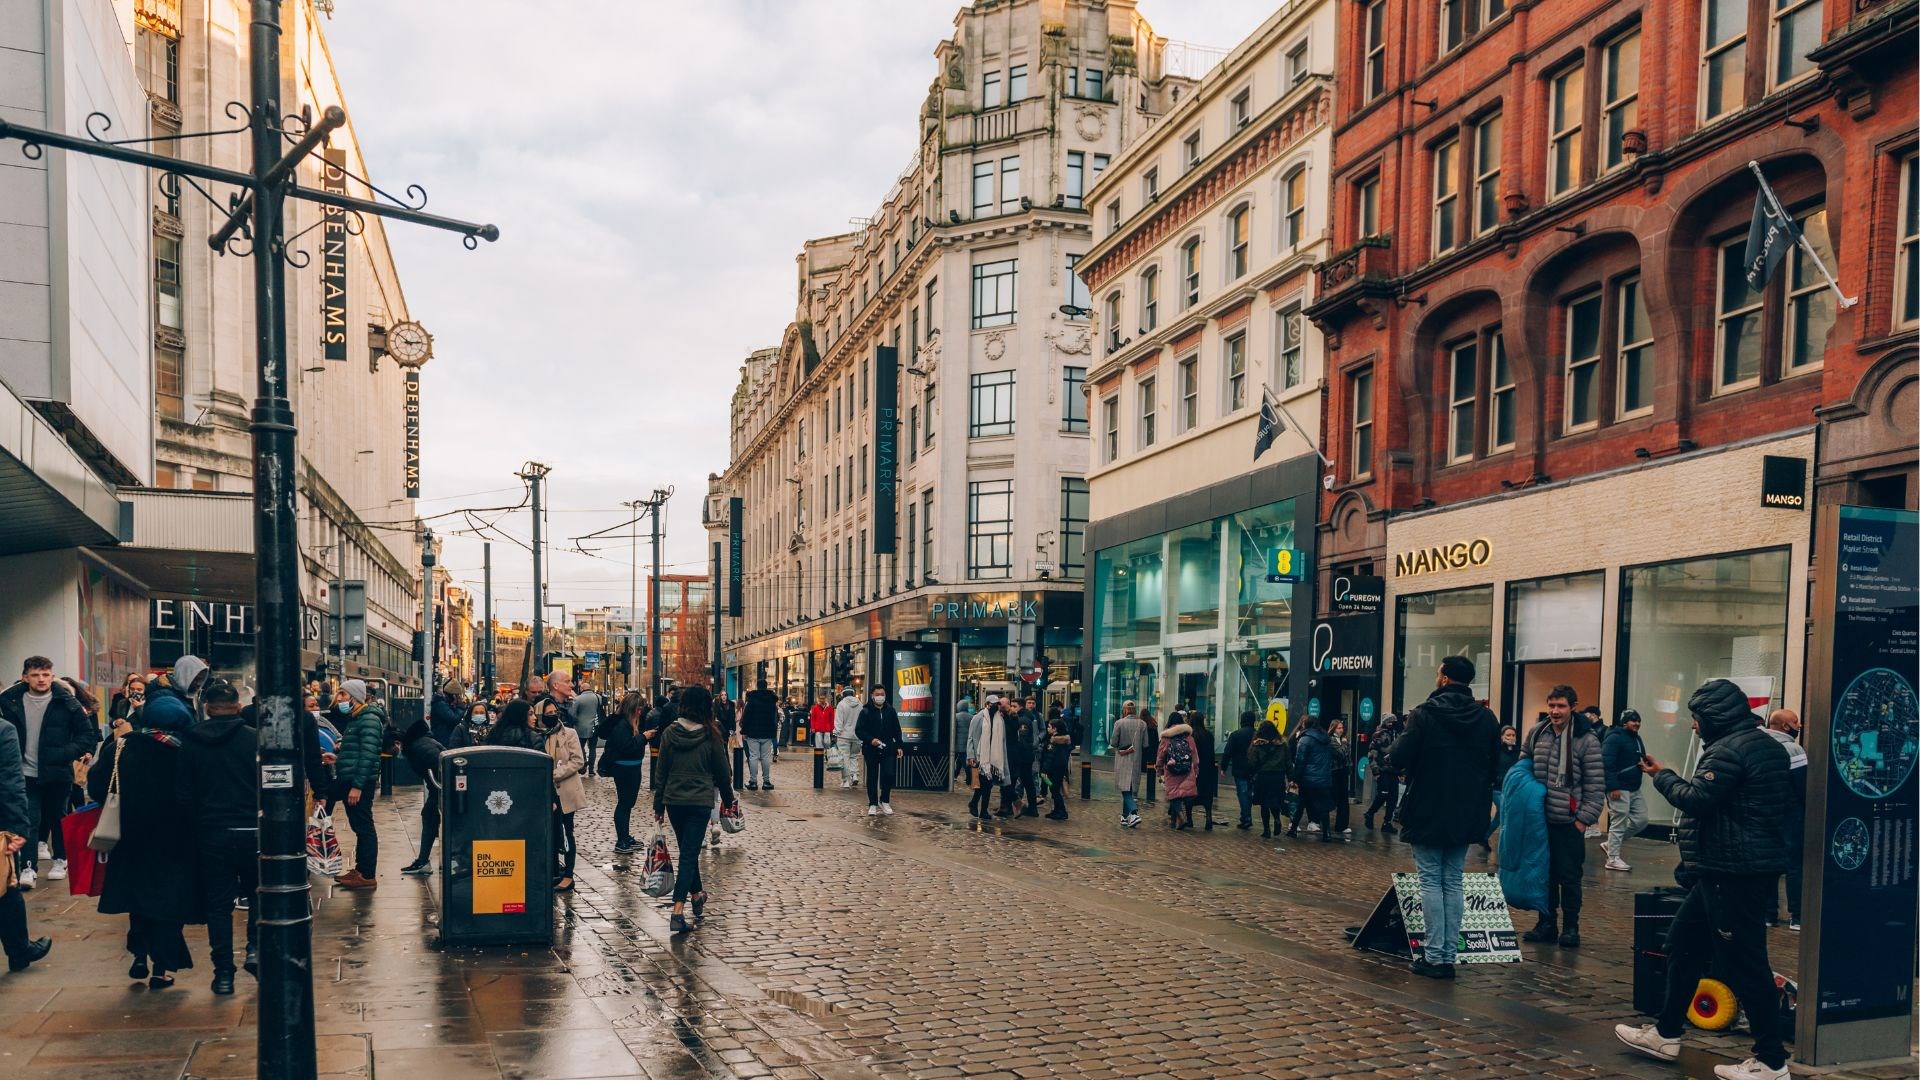 A busy city street  in Manchester with people walking and standing on the pavement